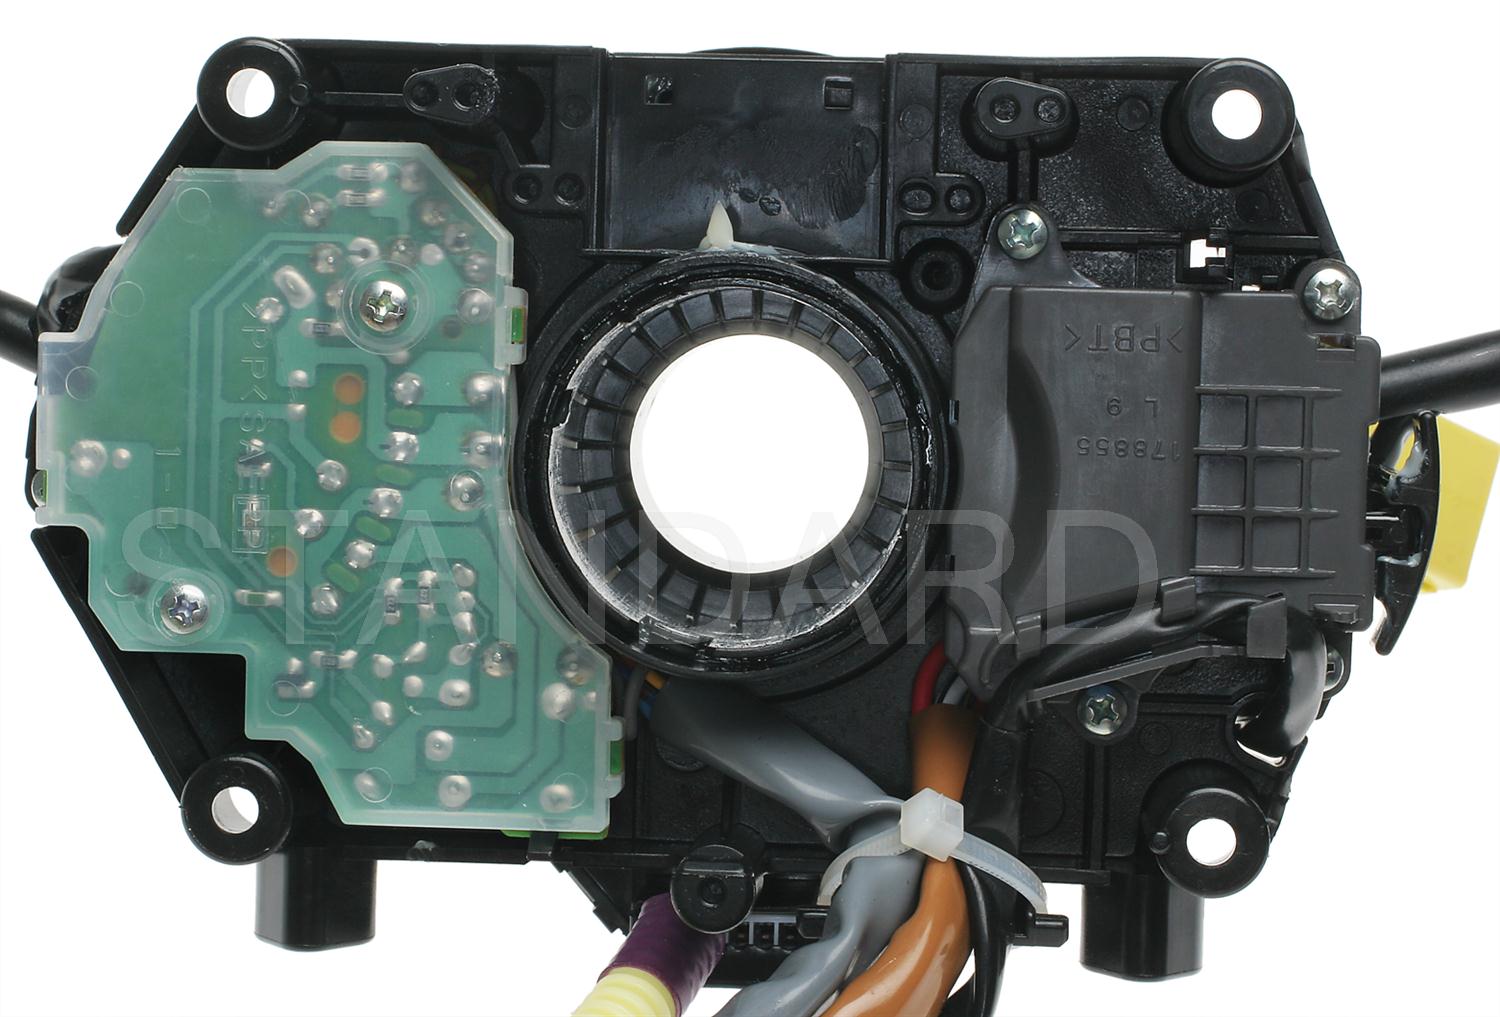 Picture of Standard Motor Products CBS1364 Standard Motor Products (cbs-1364) Headlight Dimmer Switch